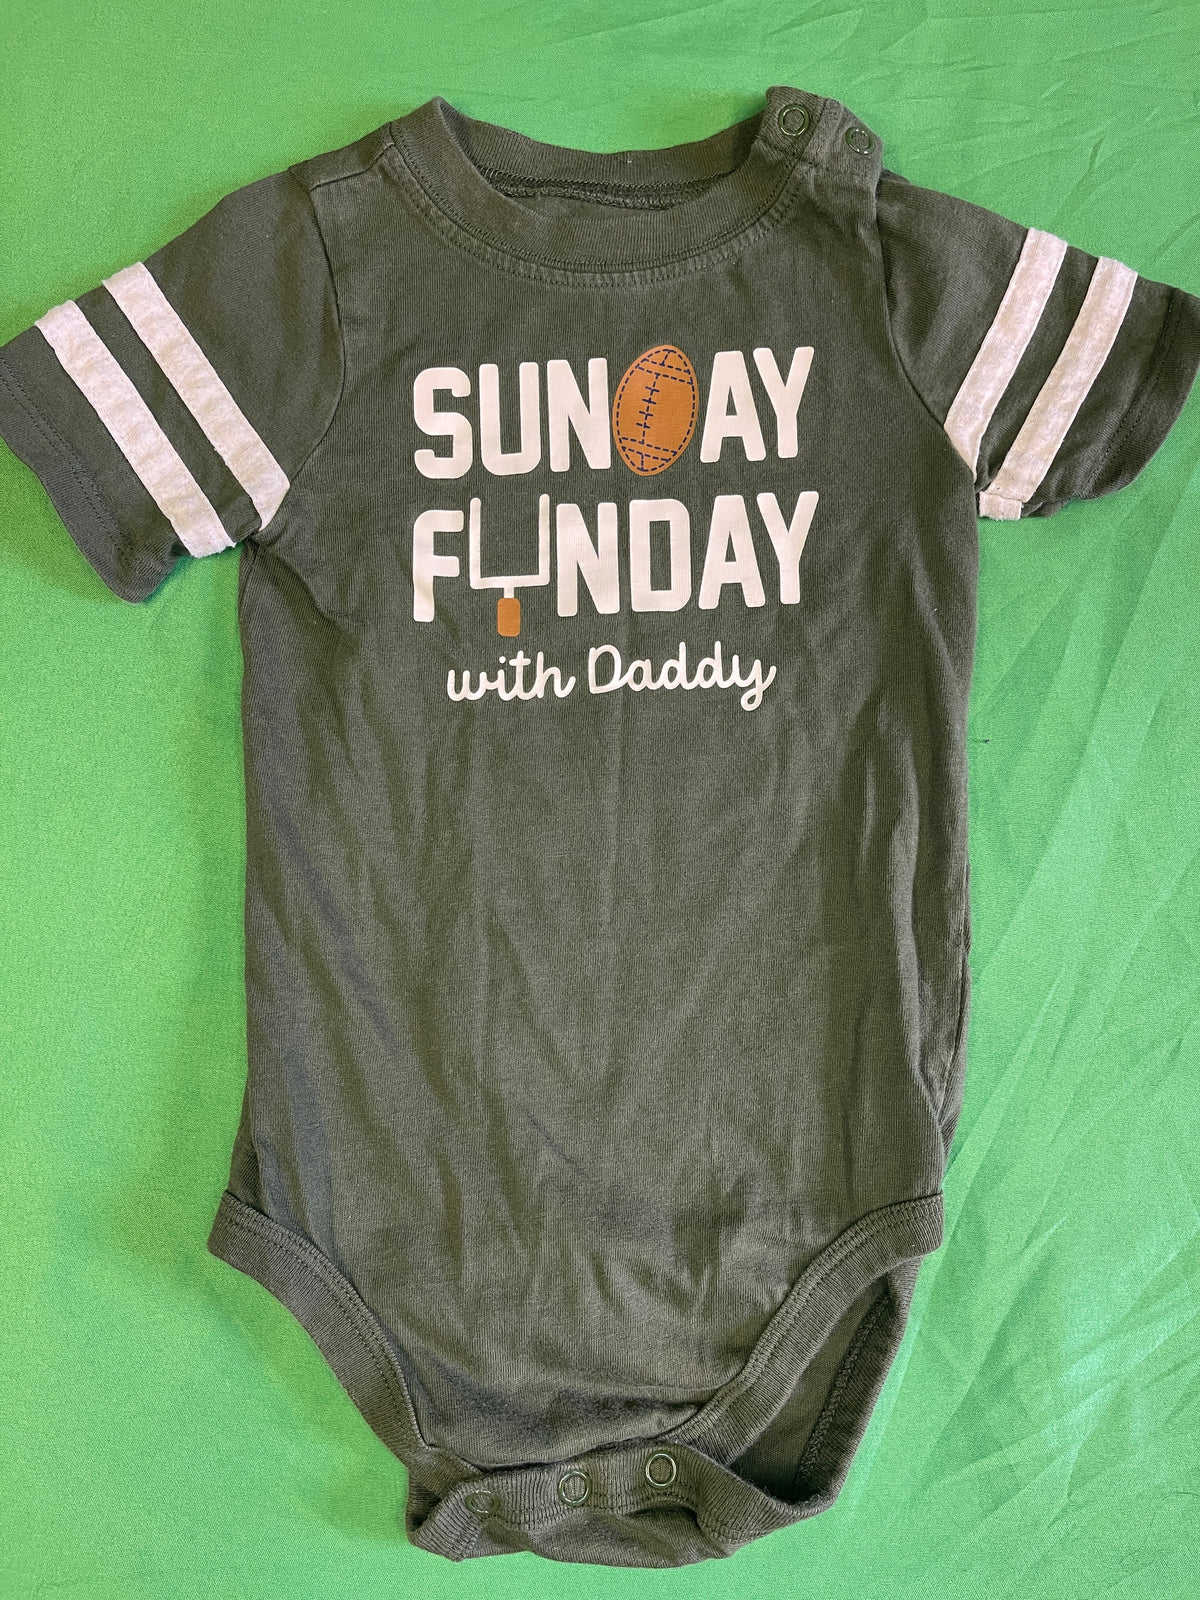 American Football "Sunday Funday with Daddy" Bodysuit/Vest Toddler 18 Months